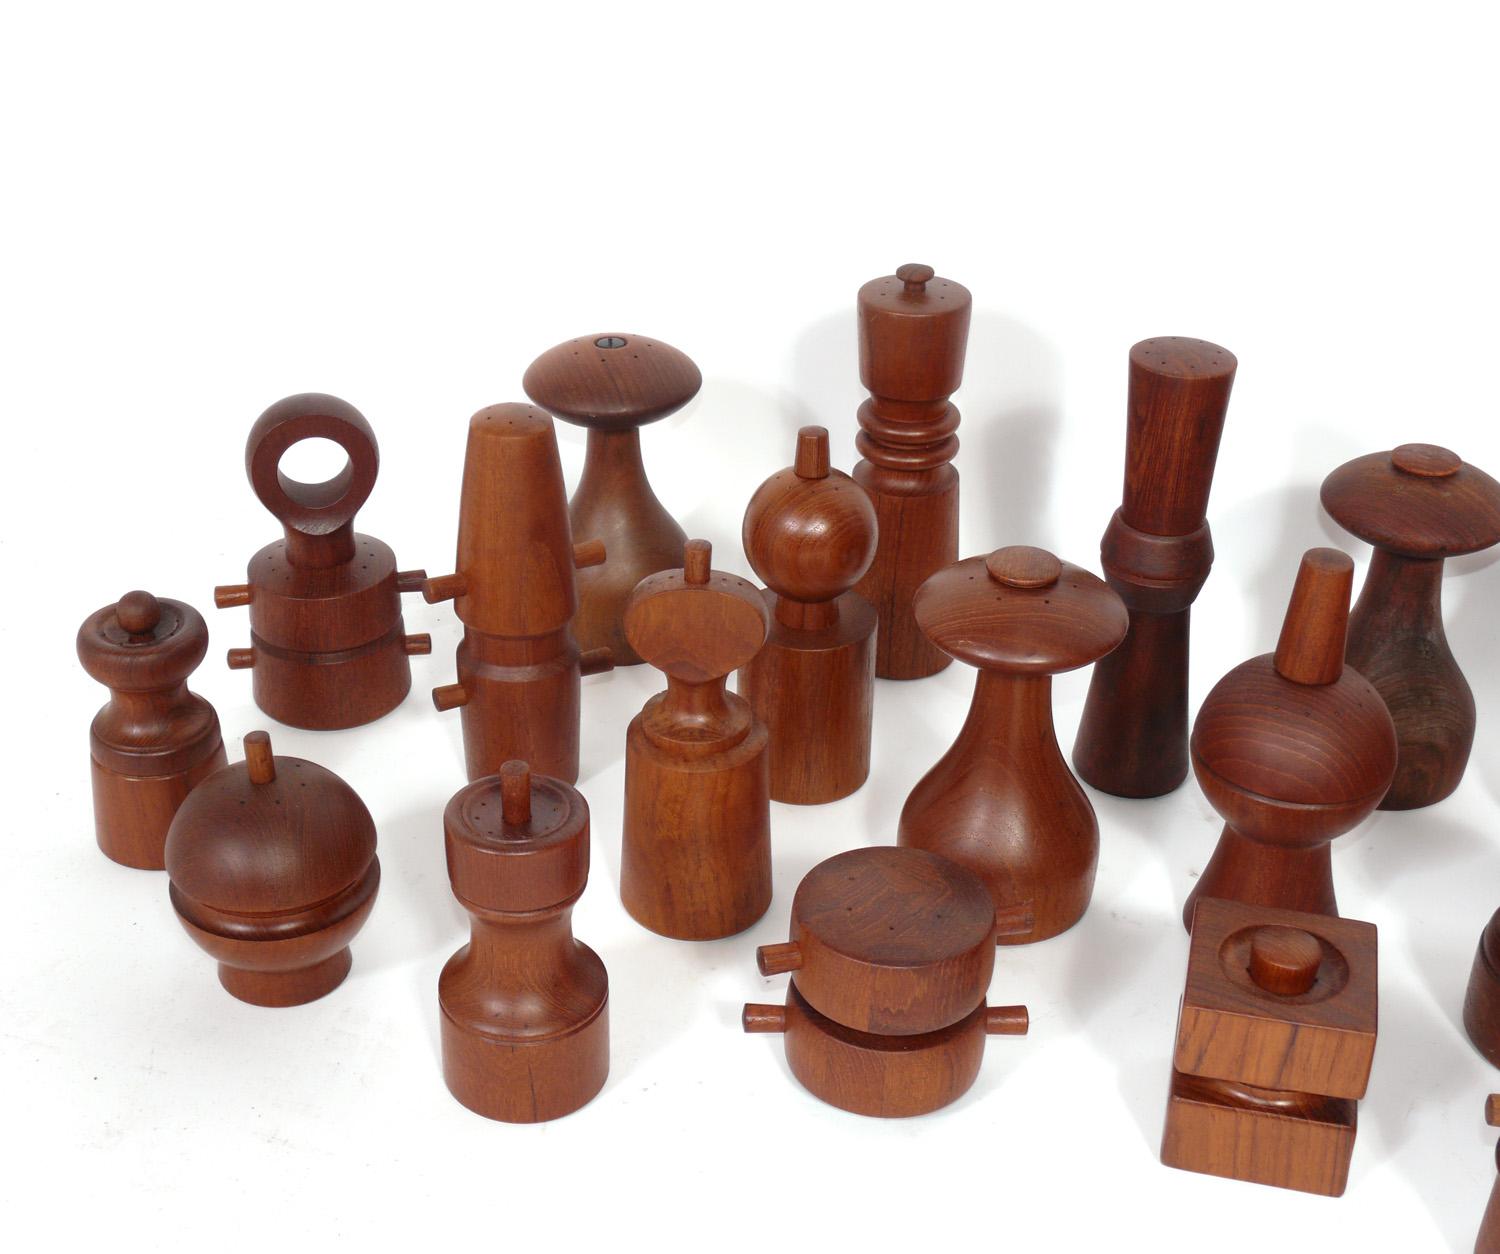 Sculptural Danish Modern Pepper Mill collection, designed by Jens Quistgaard for Dansk, Denmark, circa 1960s. The collection consists of 36 pepper mills. The largest measures 9